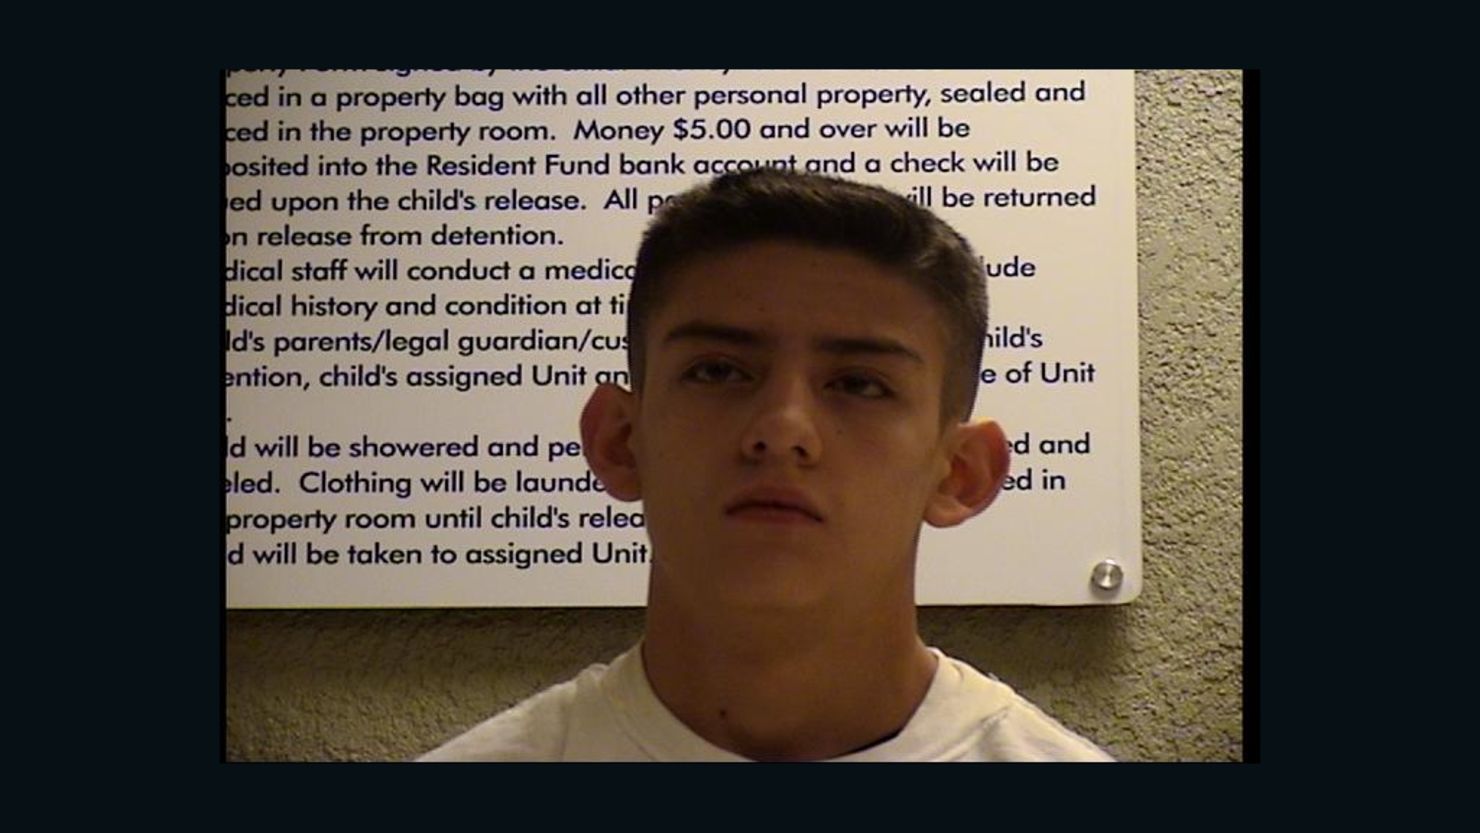 Nehemiah Griego has been charged in connection with the shooting death of his parents and siblings.